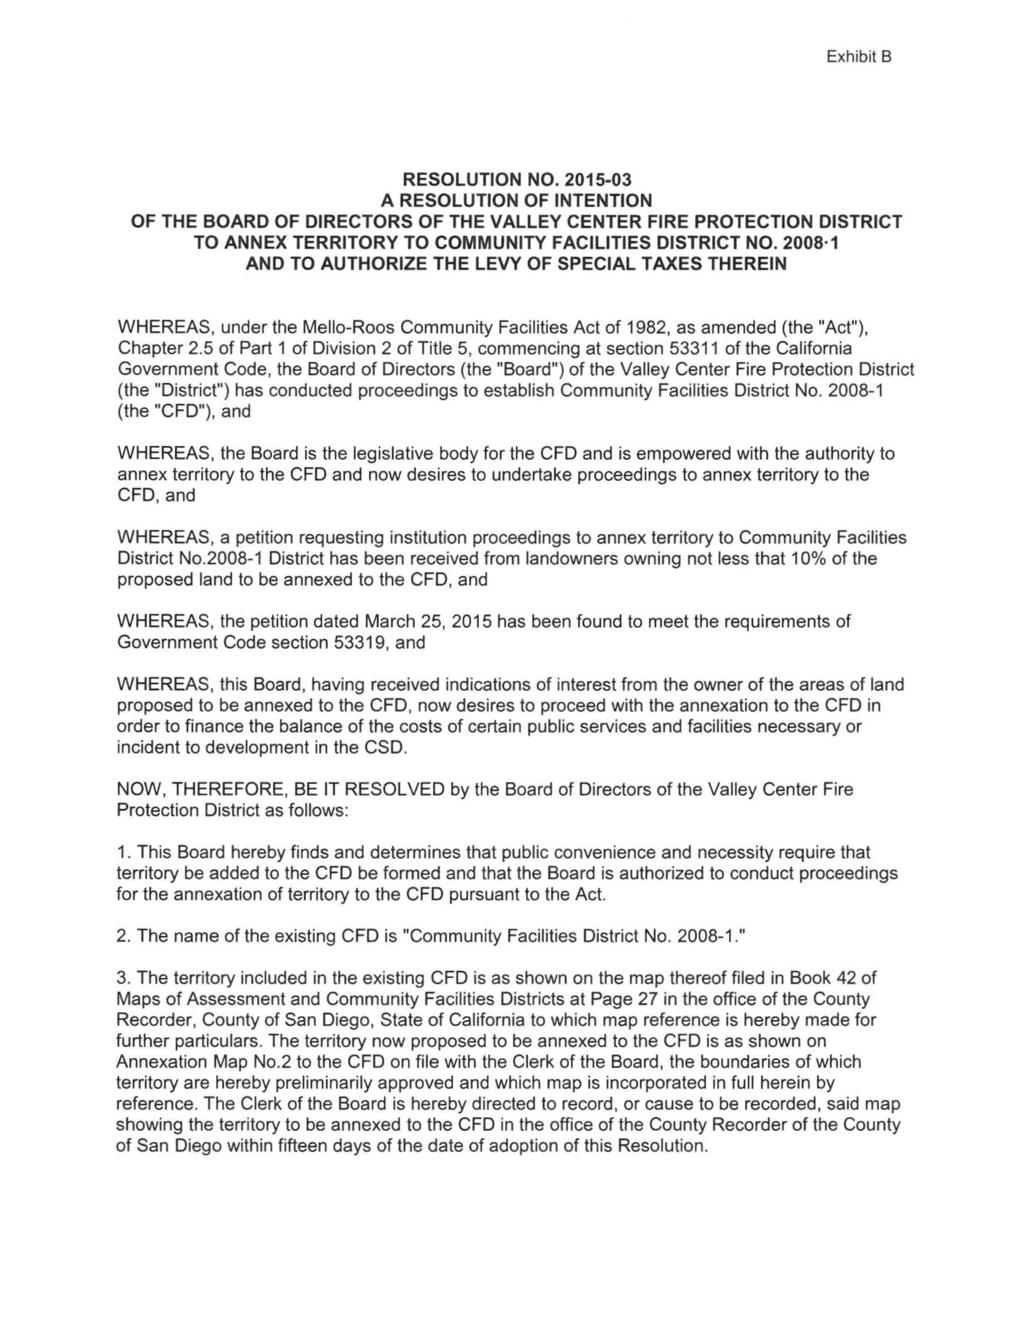 Exhibit B RESOLUTION NO. 2015-03 A RESOLUTION OF INTENTION OF THE BOARD OF DIRECTORS OF THE VALLEY CENTER FIRE PROTECTION DISTRICT TO ANNEX TERRITORY TO COMMUNITY FACILITIES DISTRICT NO.